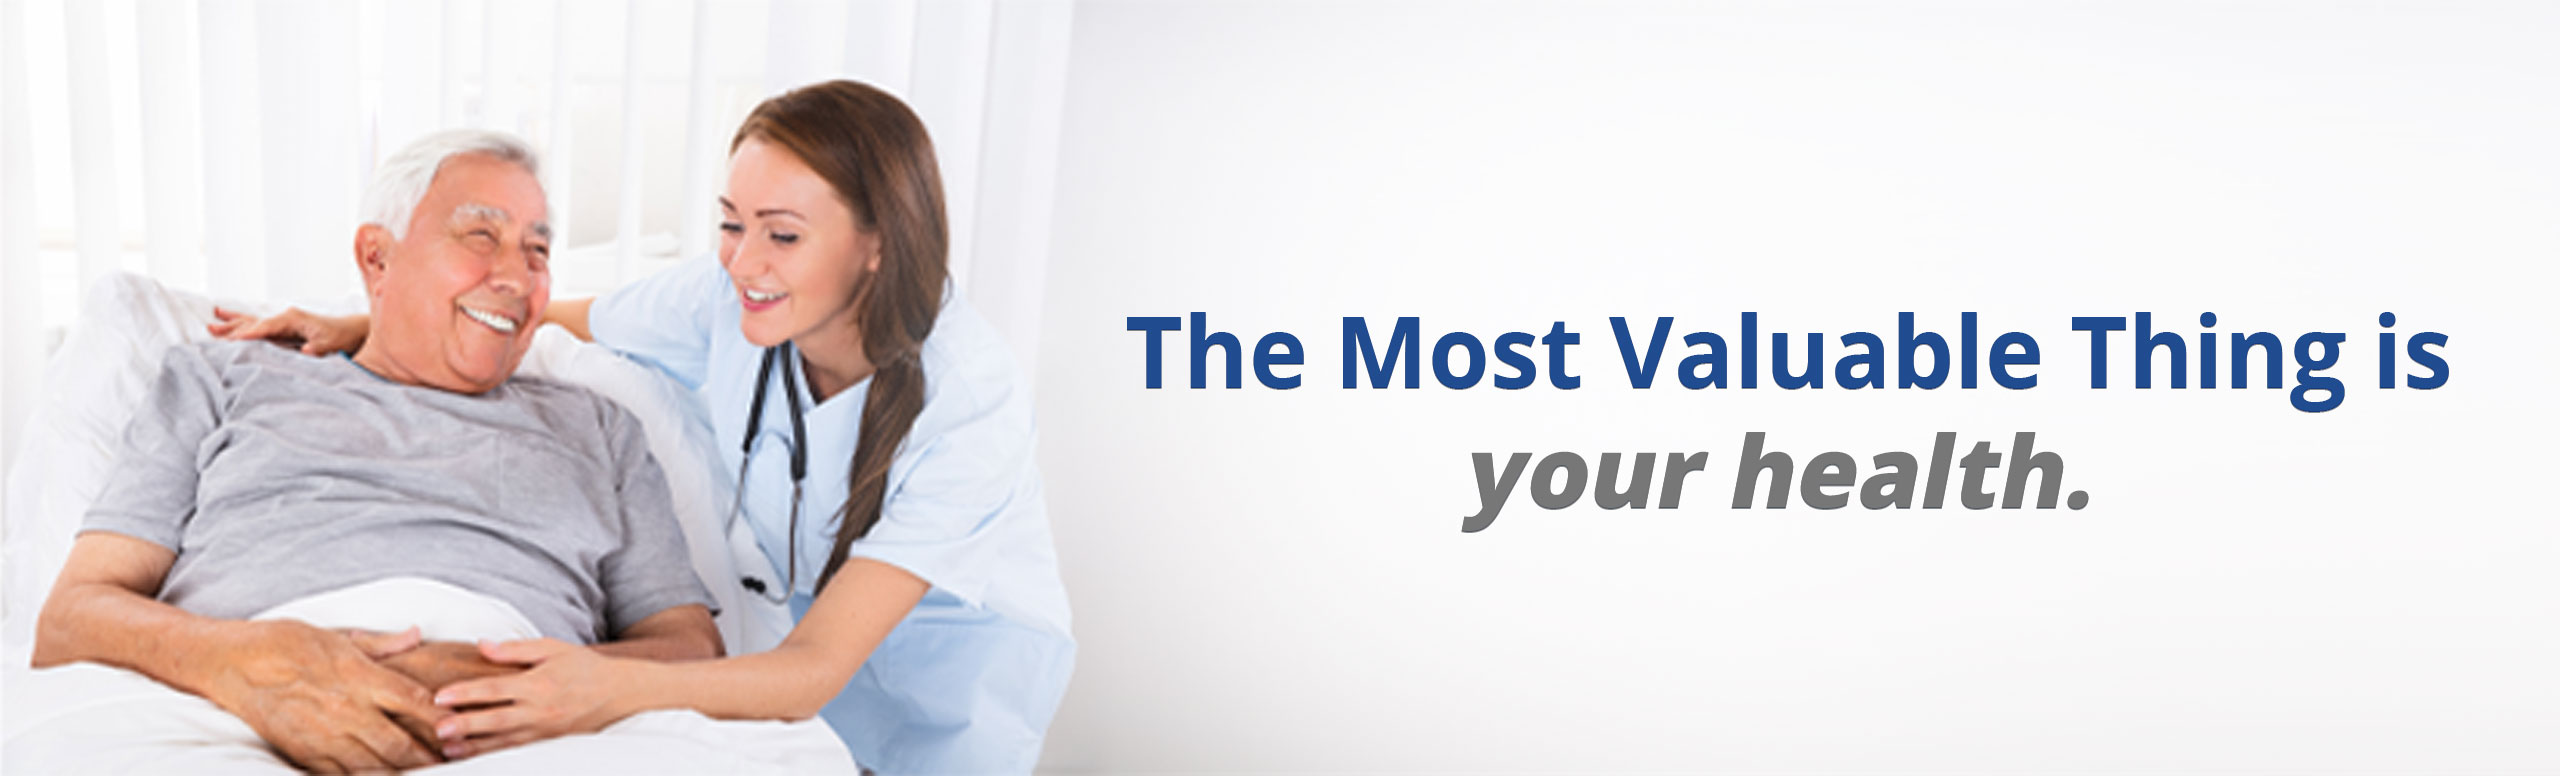 Banner picture of a female Nurse putting her around around an elderly mans shoulder. He is smiling at her. Banner says:
The Most Valuable thing is your health.